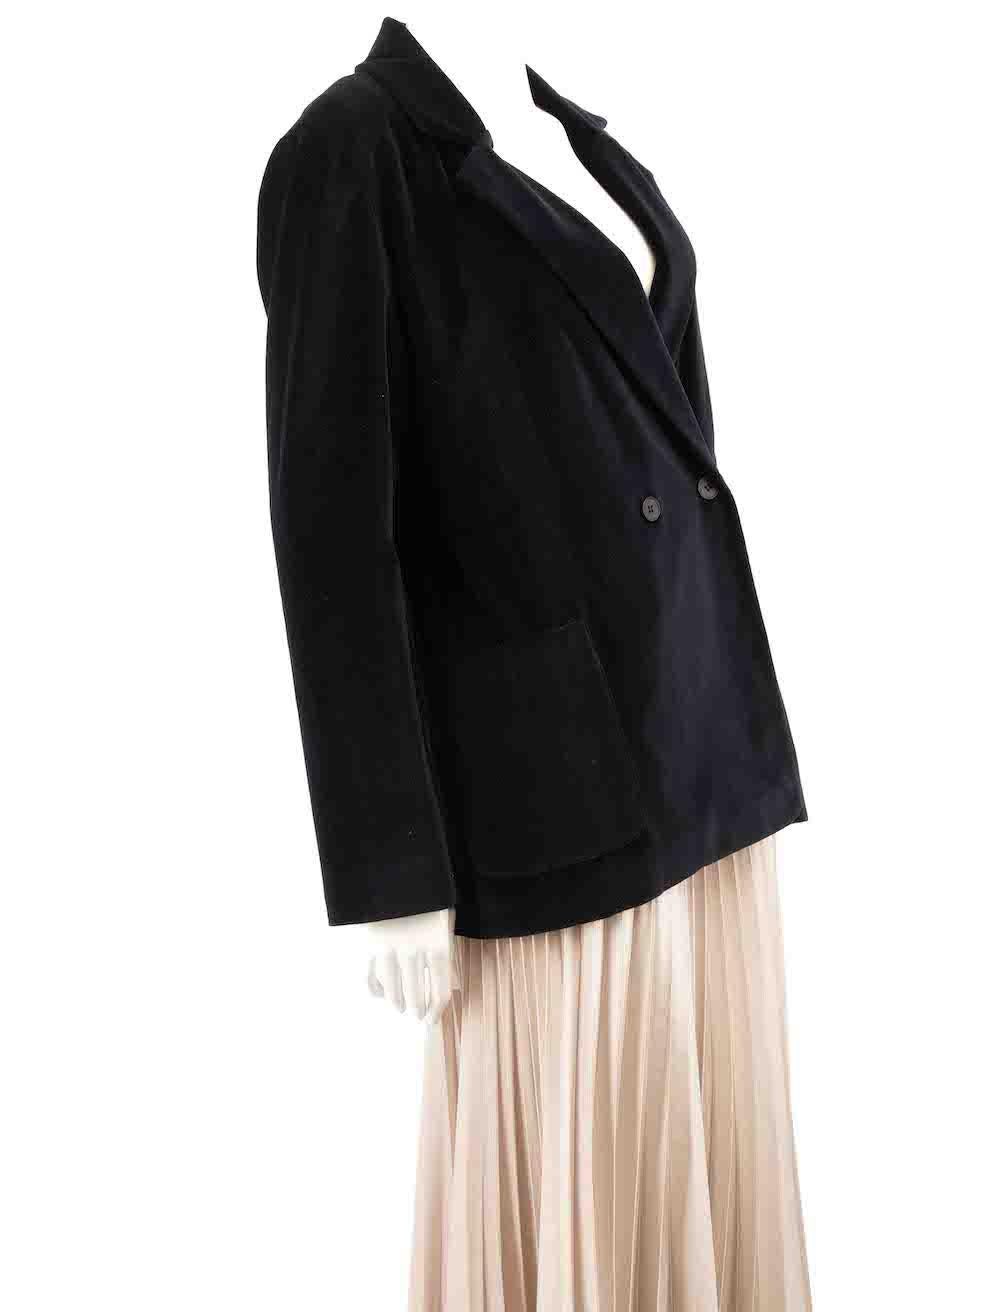 CONDITION is Never worn, with tags. No visible wear to blazer is evident on this new Jonathan Simkhai designer resale item.
 
 
 
 Details
 
 
 Black
 
 Velvet
 
 Blazer
 
 Double breasted
 
 Button fastening
 
 Buttoned cuffs
 
 3x Front pockets
 
